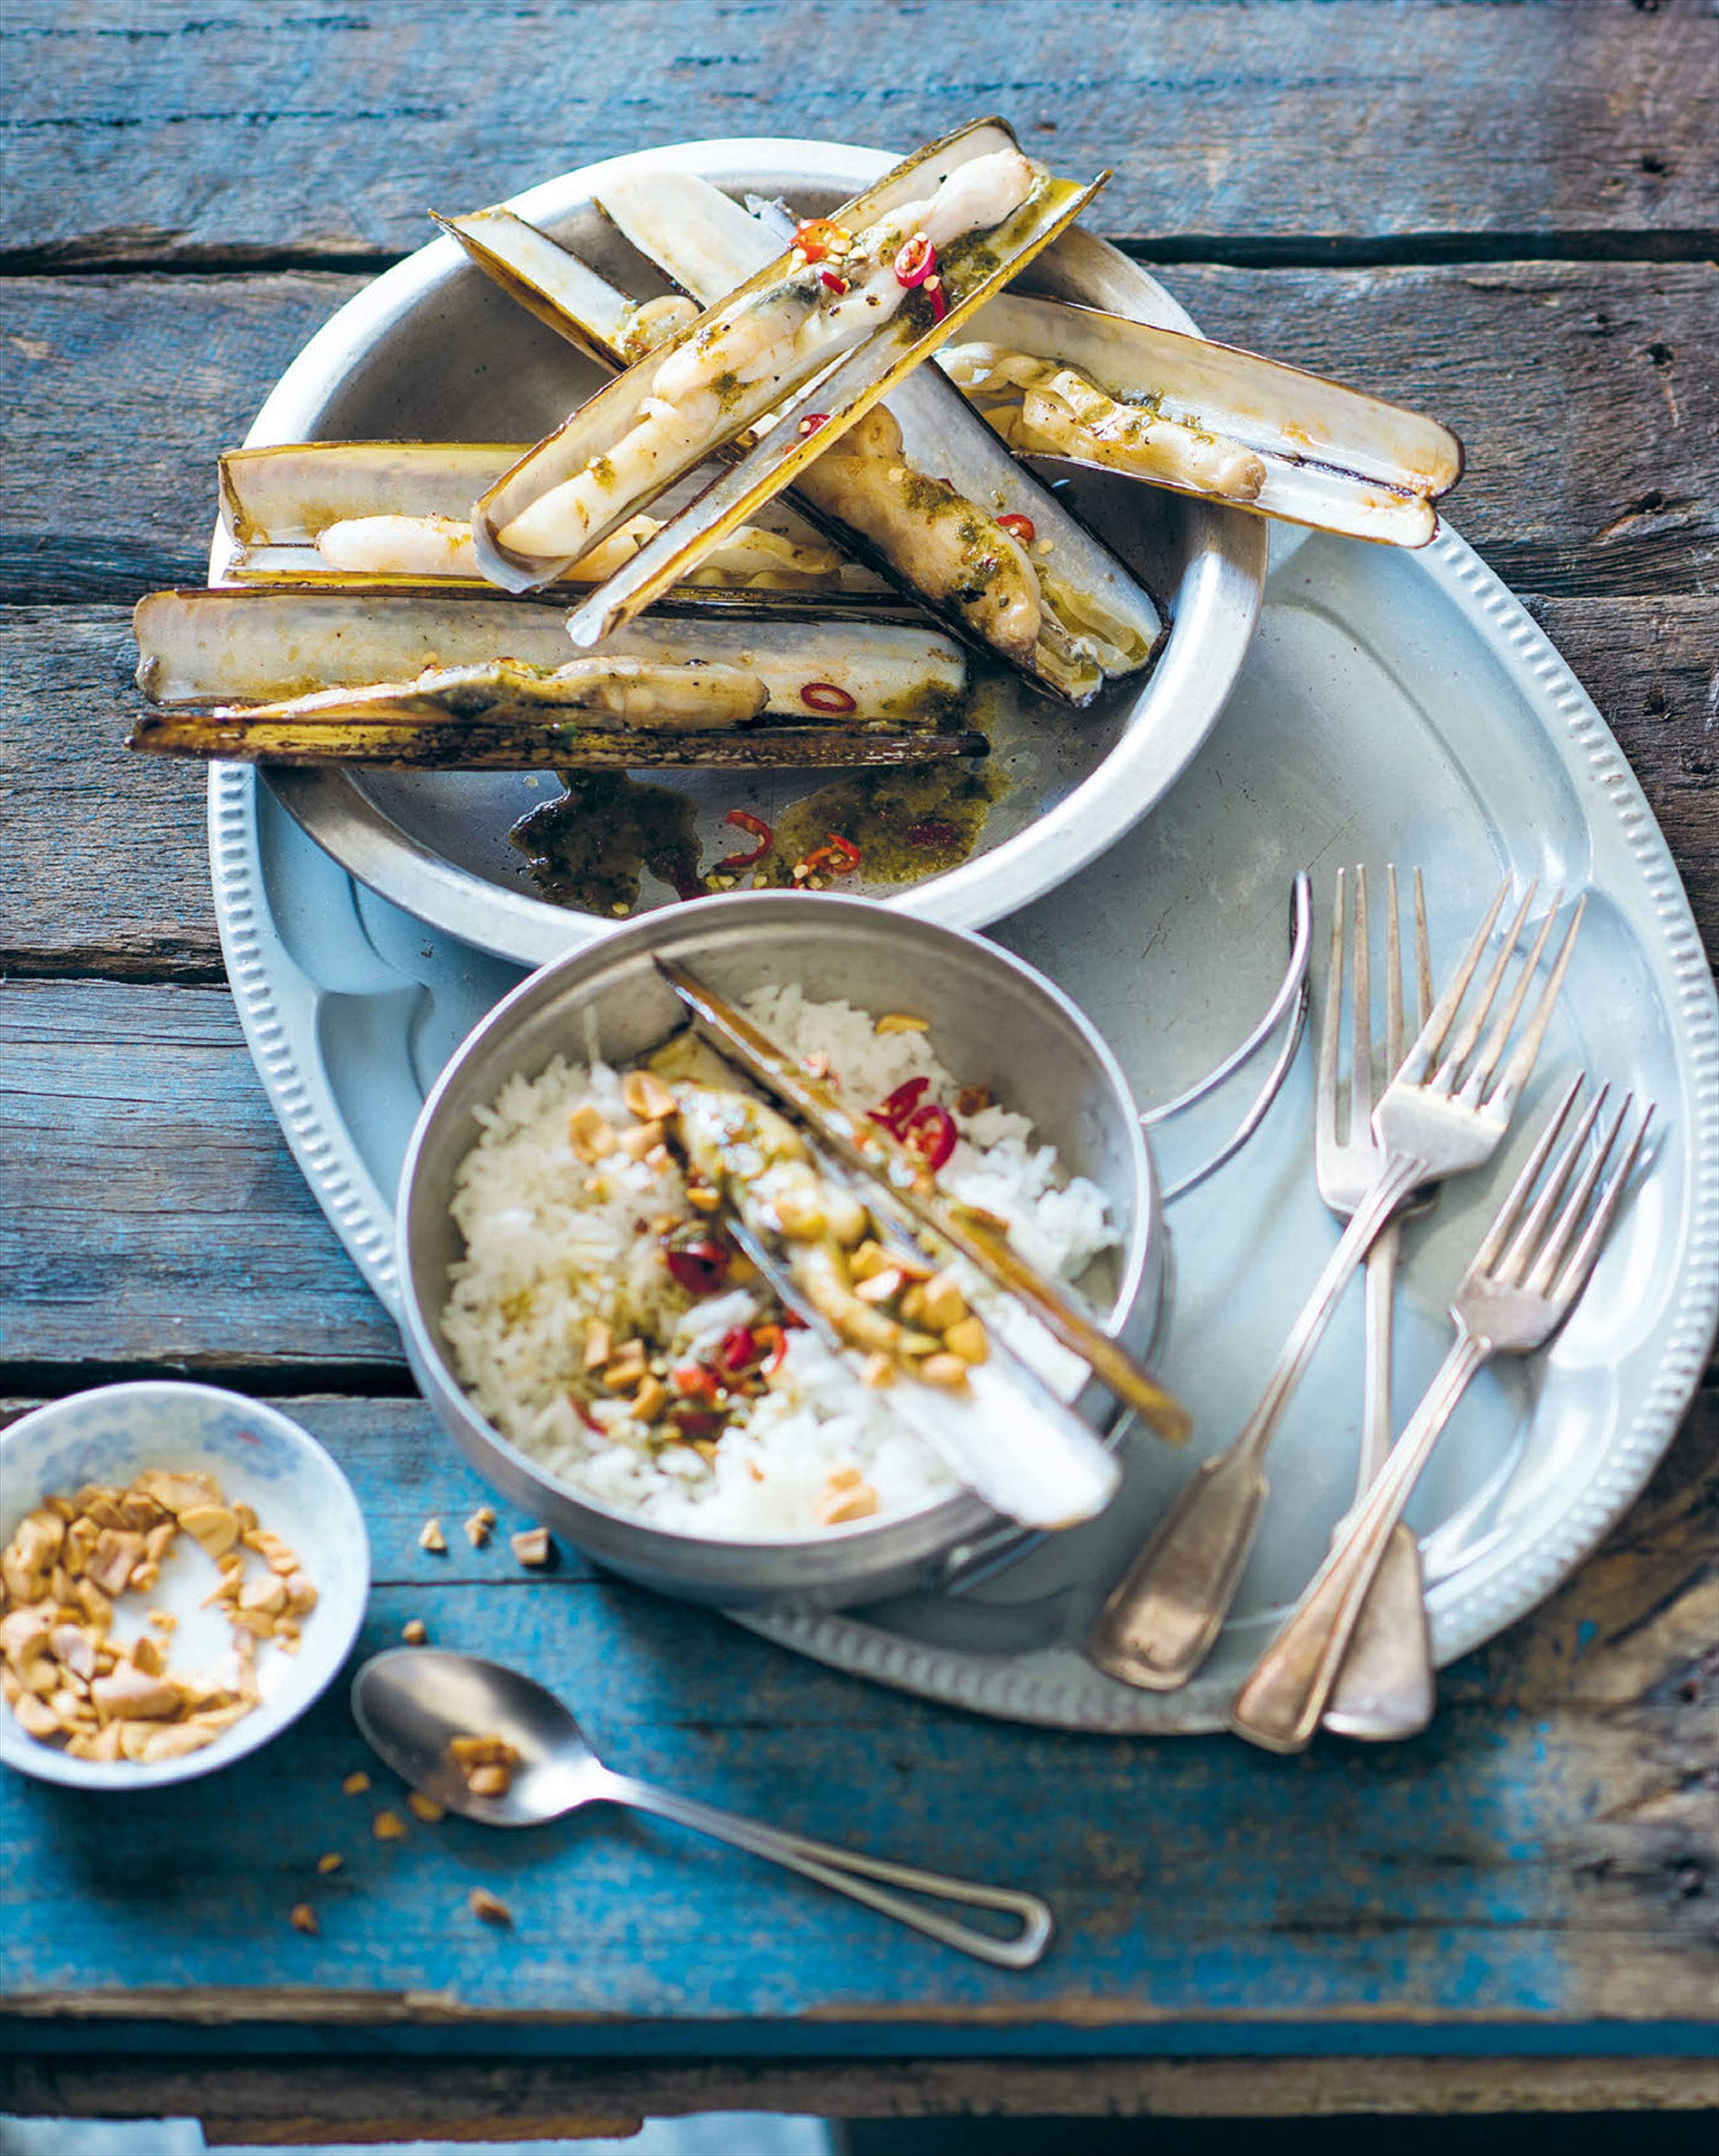 Chargrilled razor clams with lime dressing